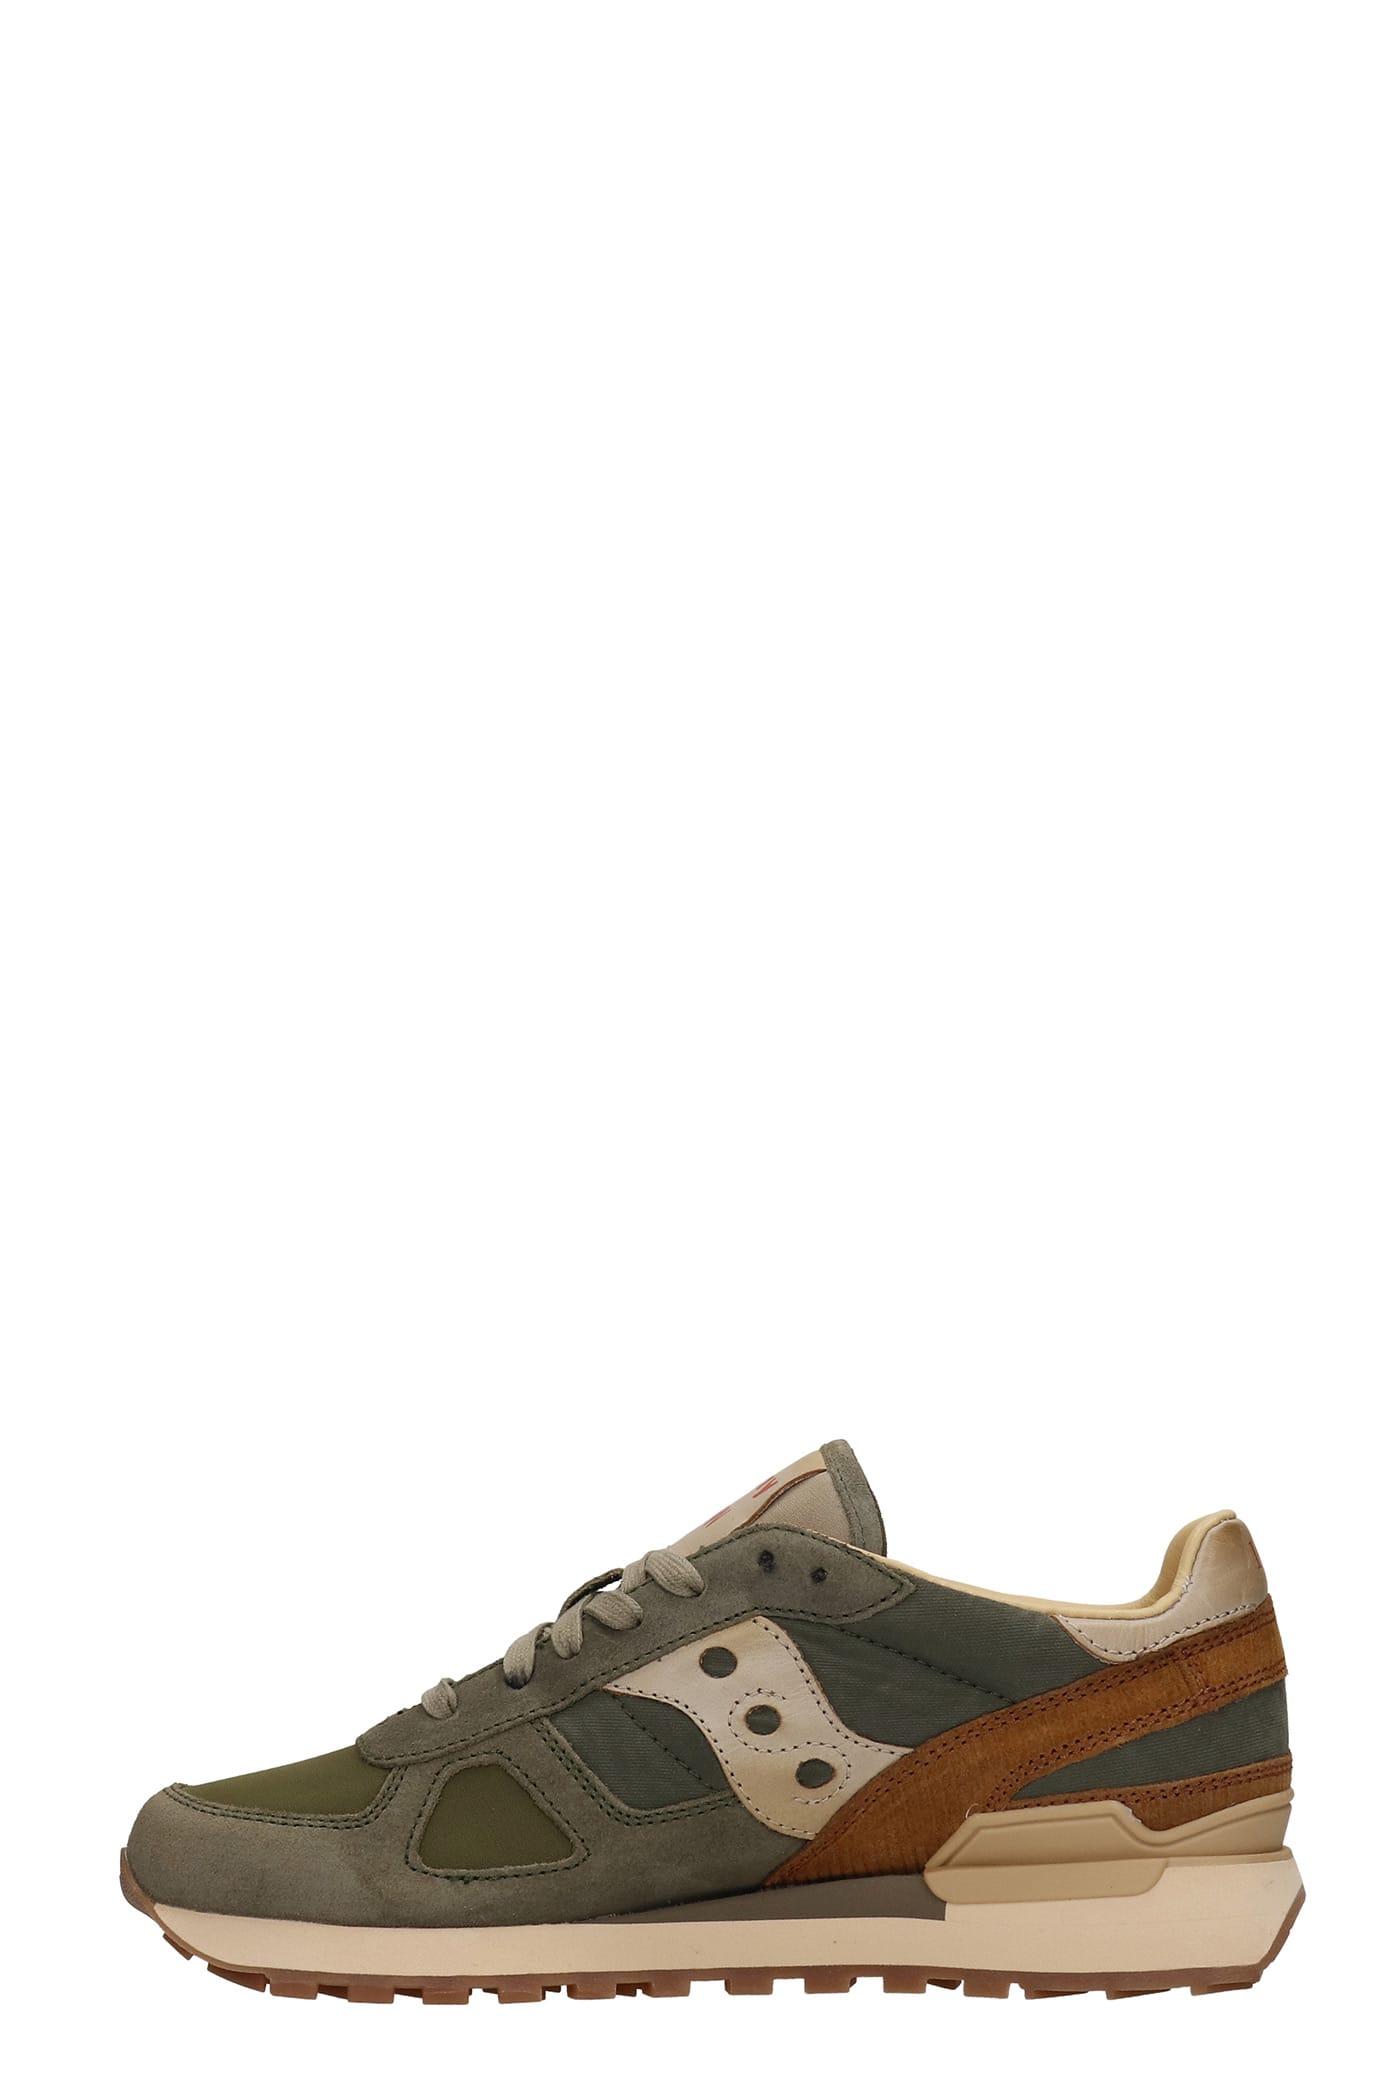 Saucony Shadow Original Sneakers In Green Suede And Fabric for Men | Lyst